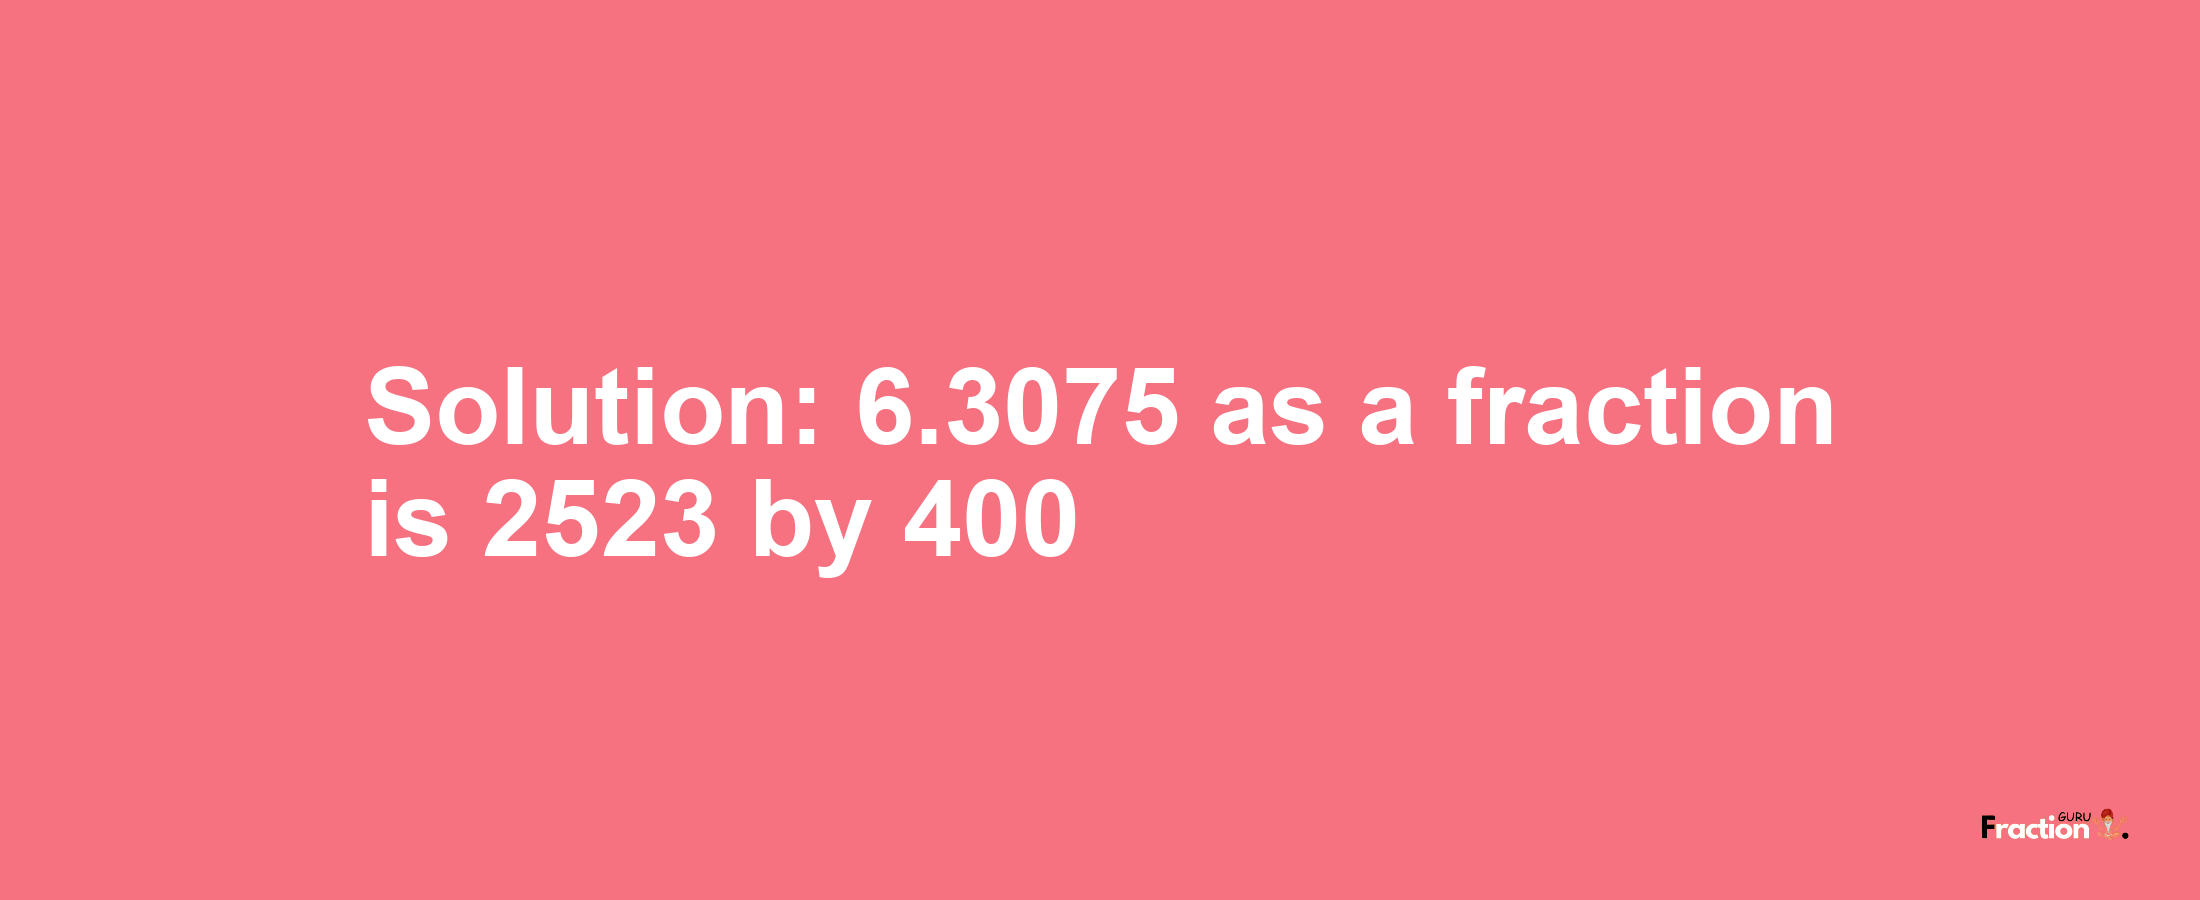 Solution:6.3075 as a fraction is 2523/400